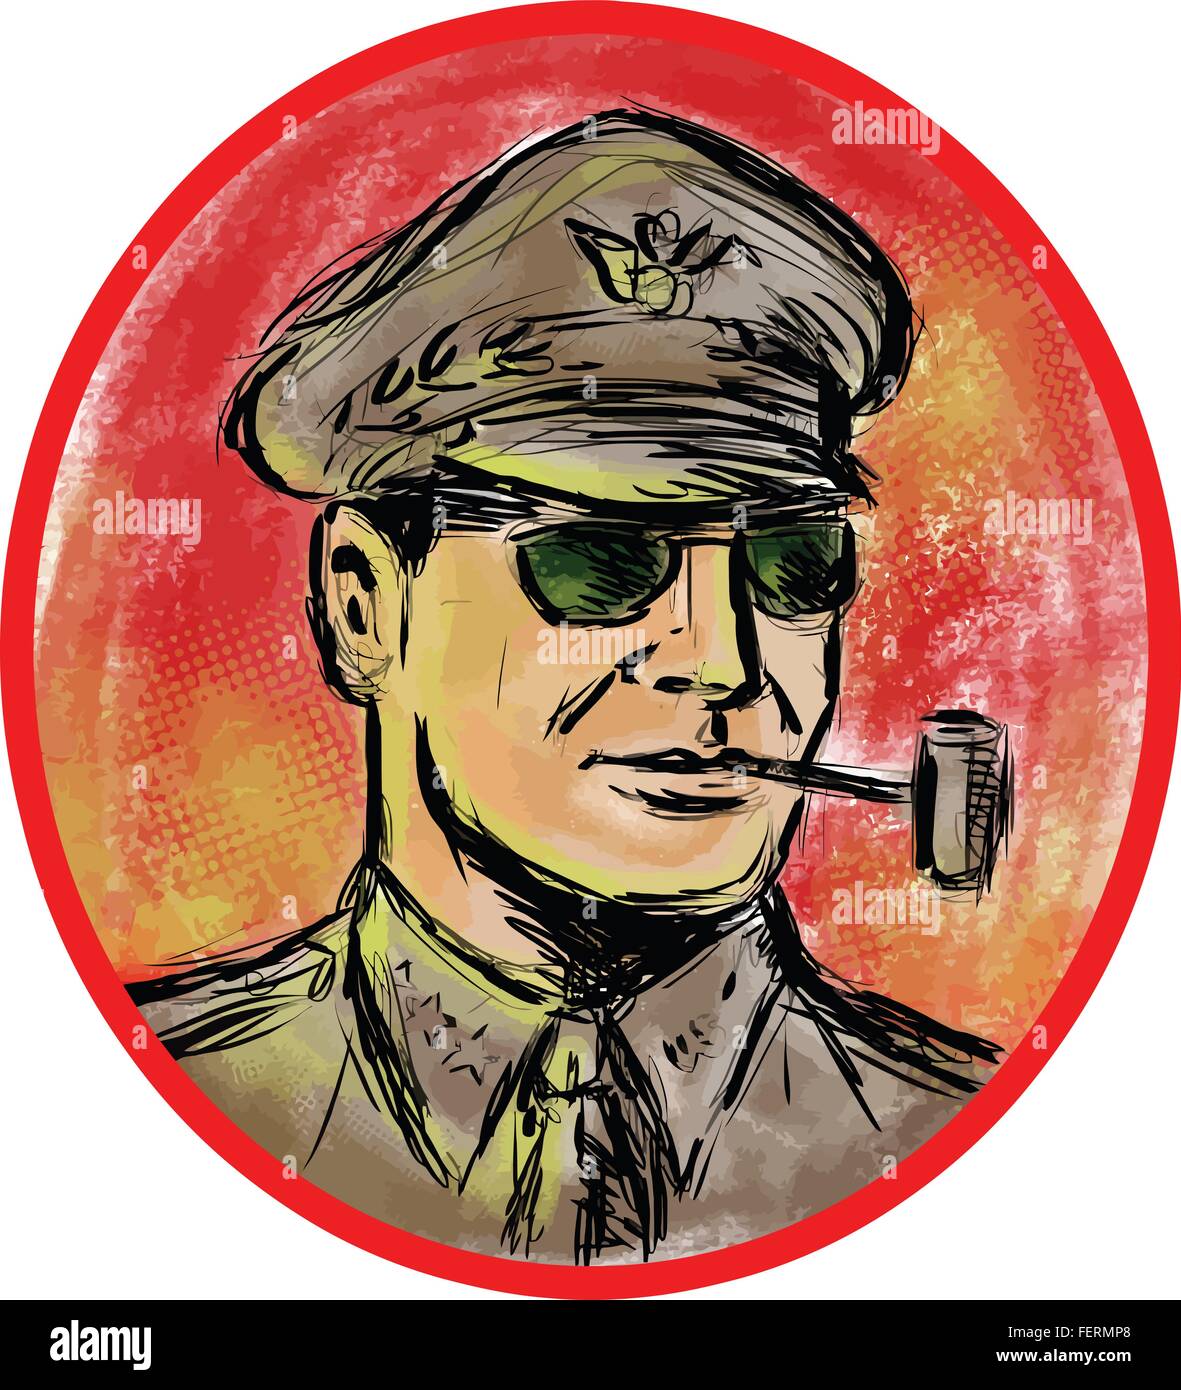 Watercolor style illustration of a world war 2 II general officer smoking a corn cob pipe set inside oval shape on isolated background. Stock Vector